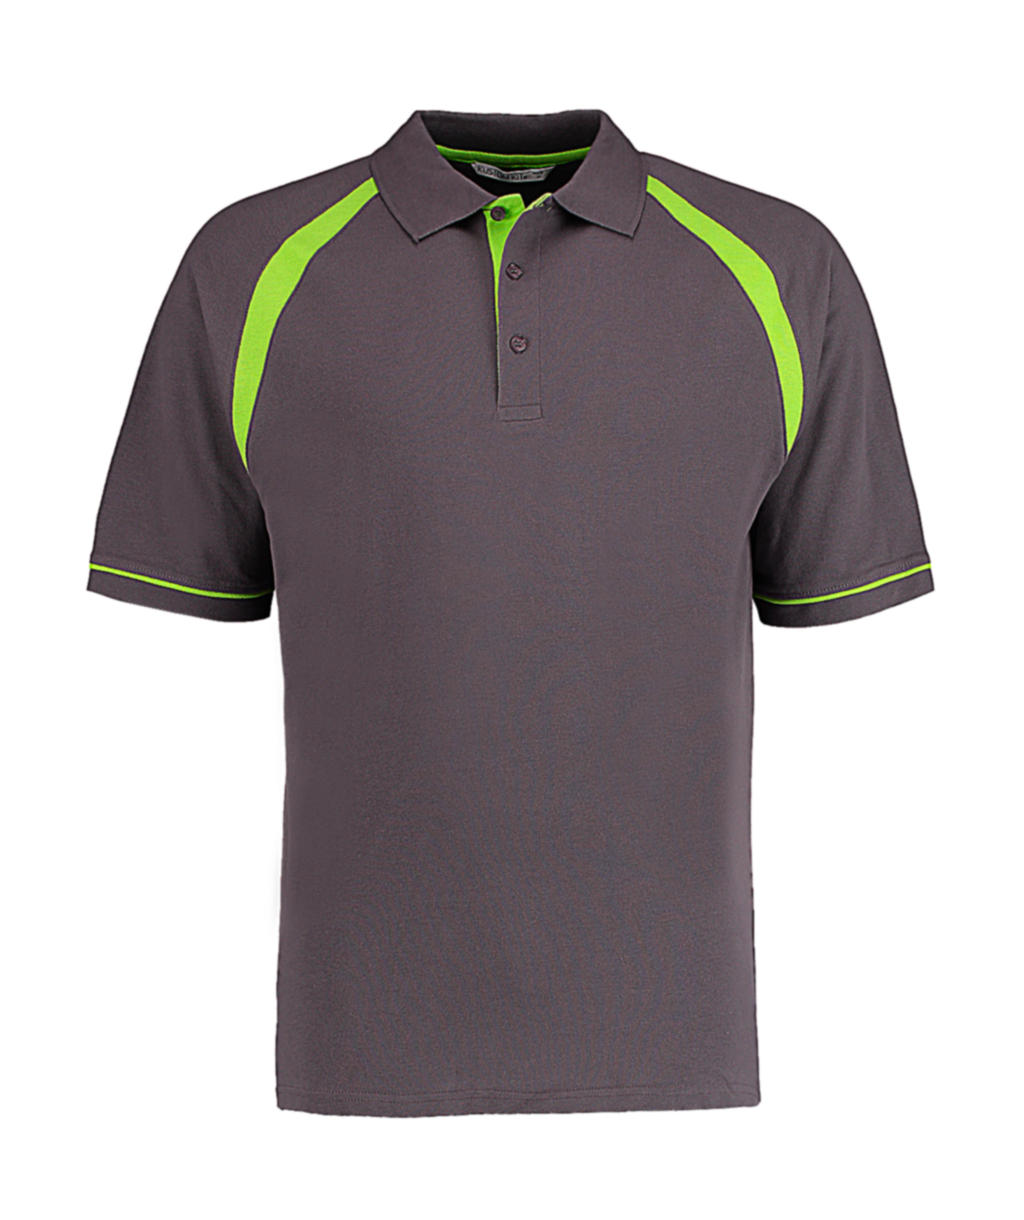 515.11 / Classic Fit Oak Hill Polo / Charcoal/Lime